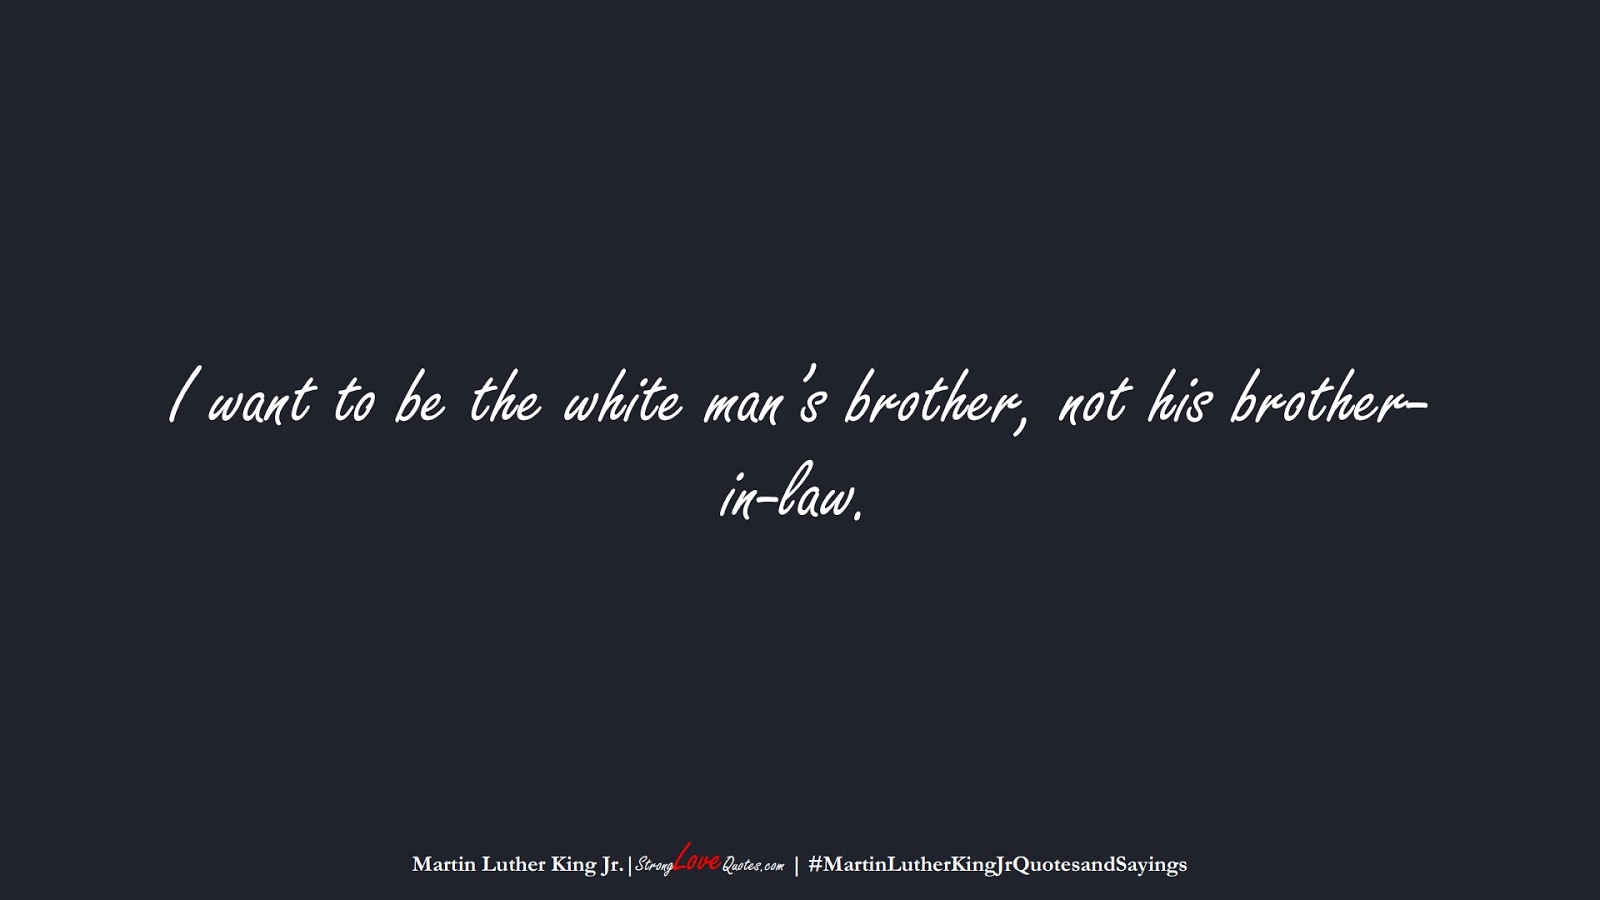 I want to be the white man’s brother, not his brother-in-law. (Martin Luther King Jr.);  #MartinLutherKingJrQuotesandSayings